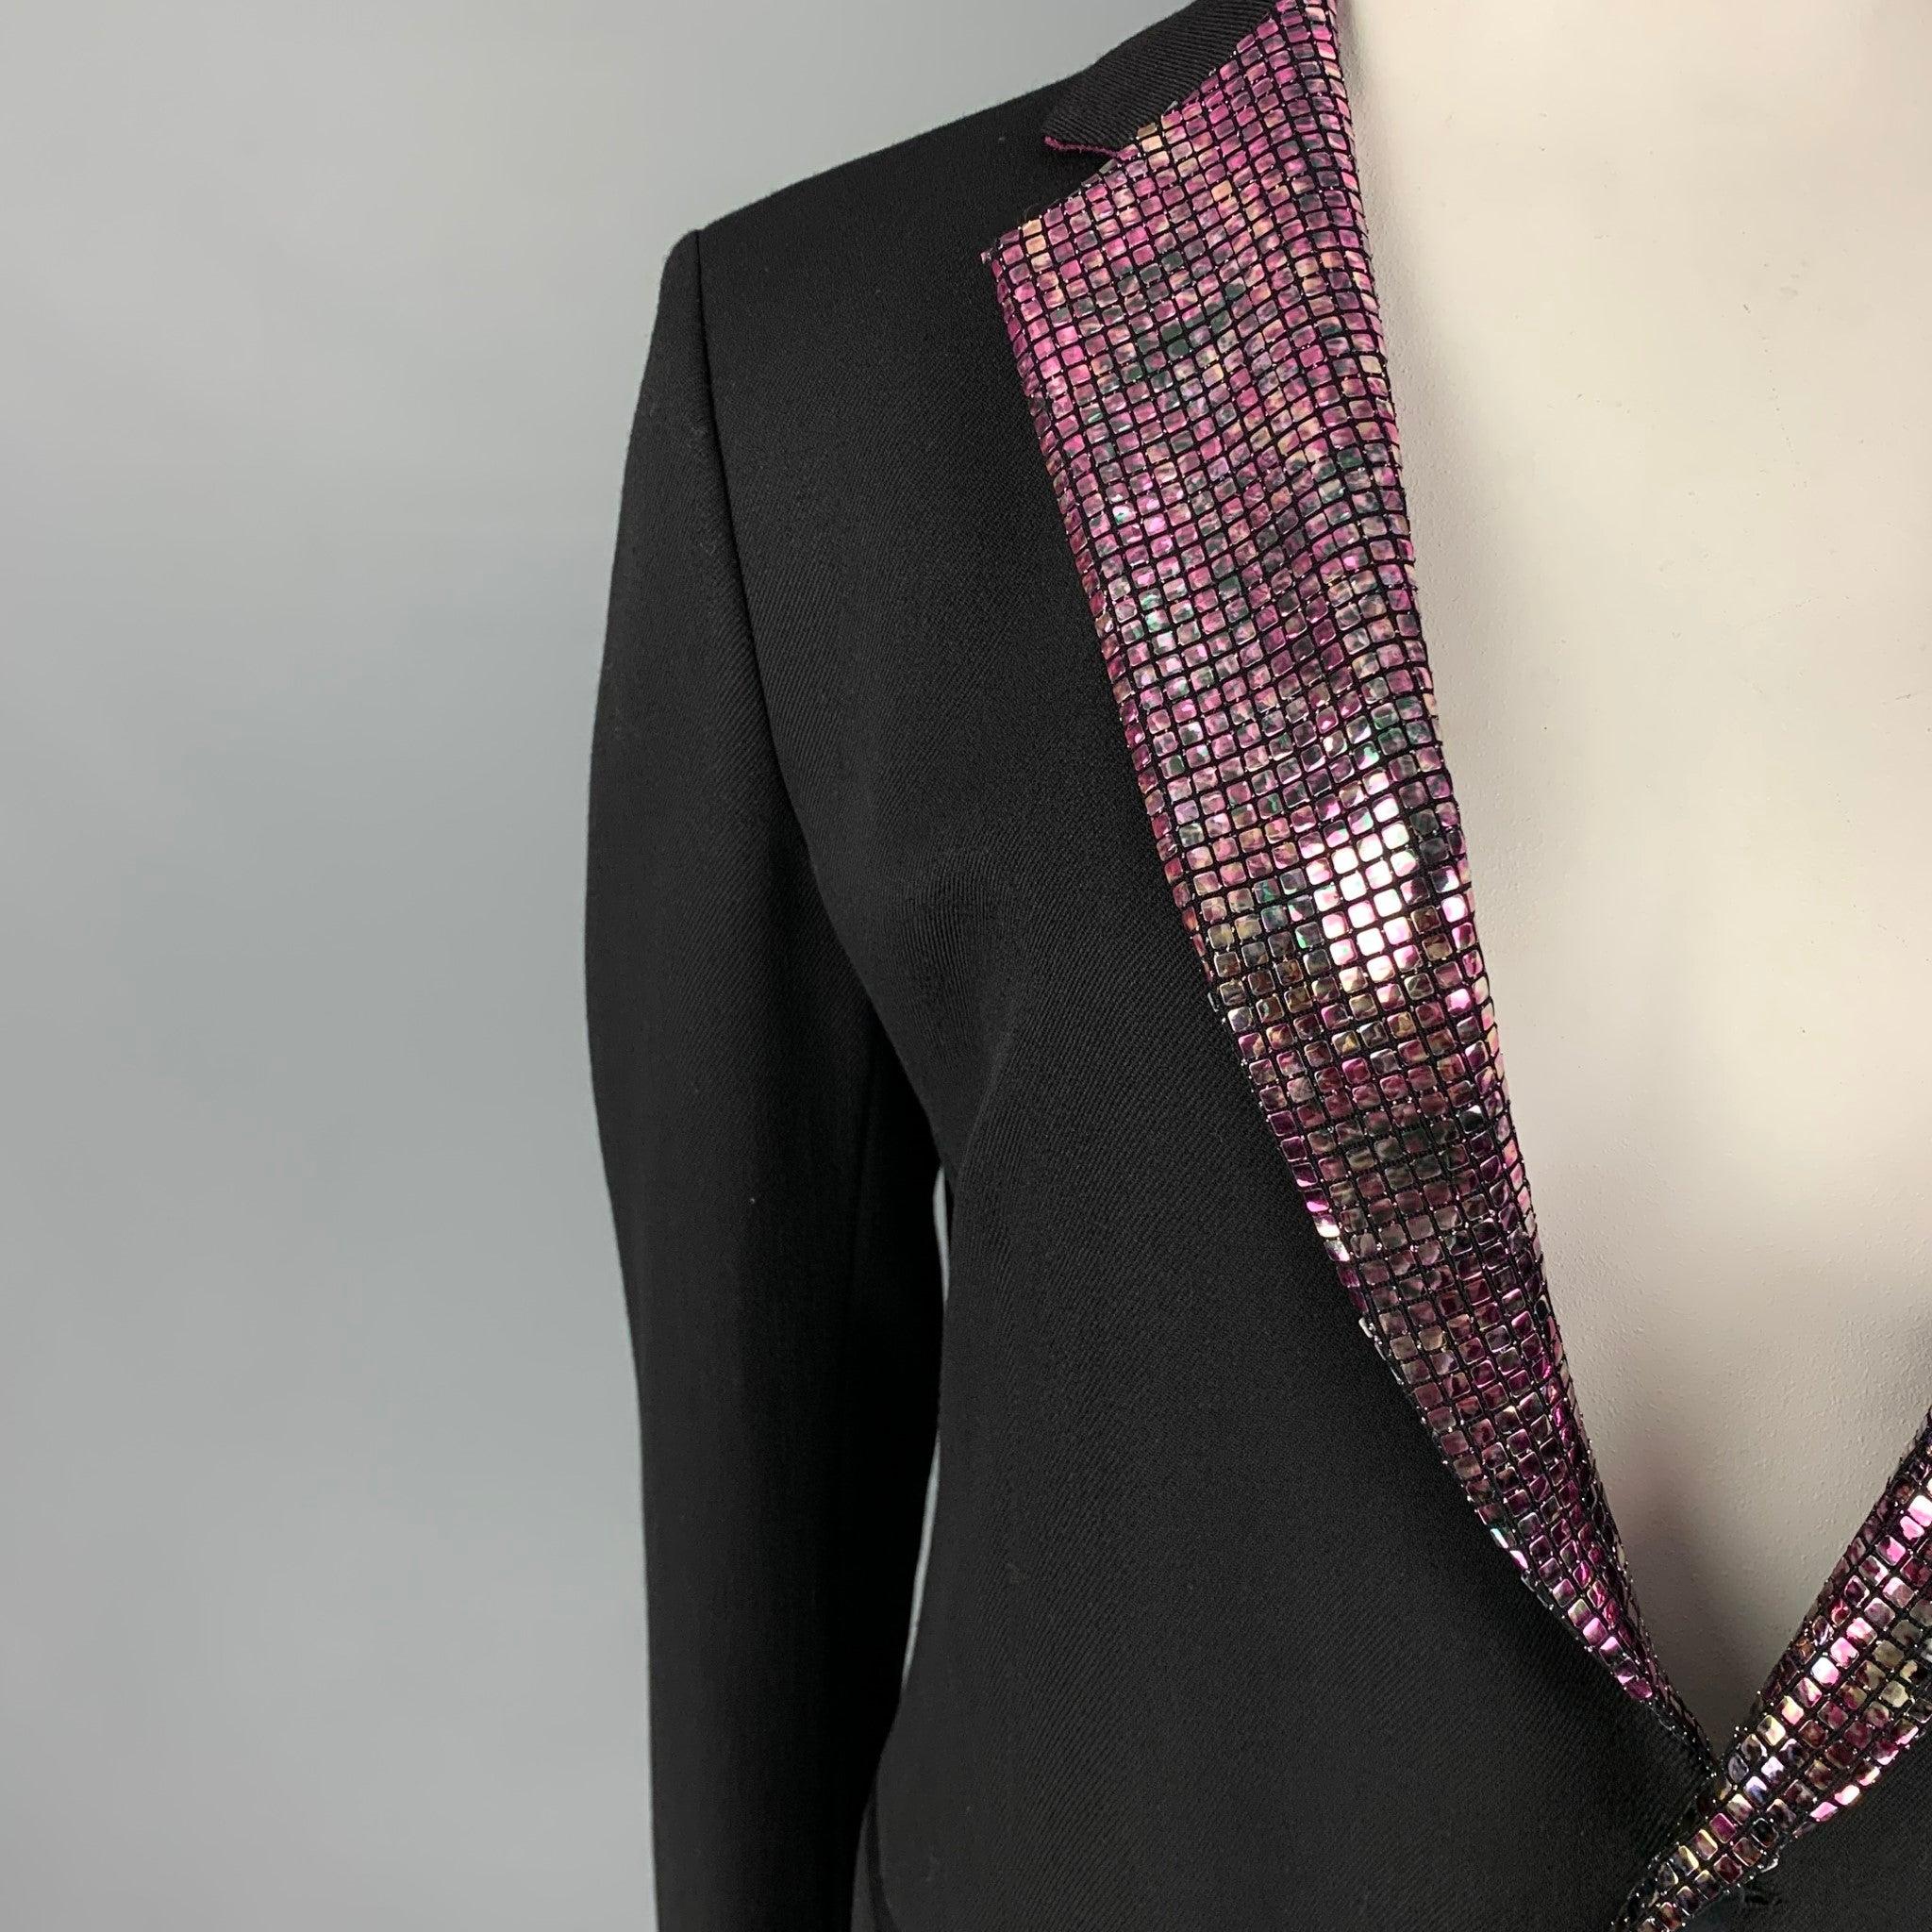 ETRO jacket comes in a black wool with a full print liner featuring a pink metallic notch lapel, slit pockets, single back vent, and a double button closure. Made in Italy.
Excellent
Pre-Owned Condition. 

Marked:   46 

Measurements: 
 
Shoulder: